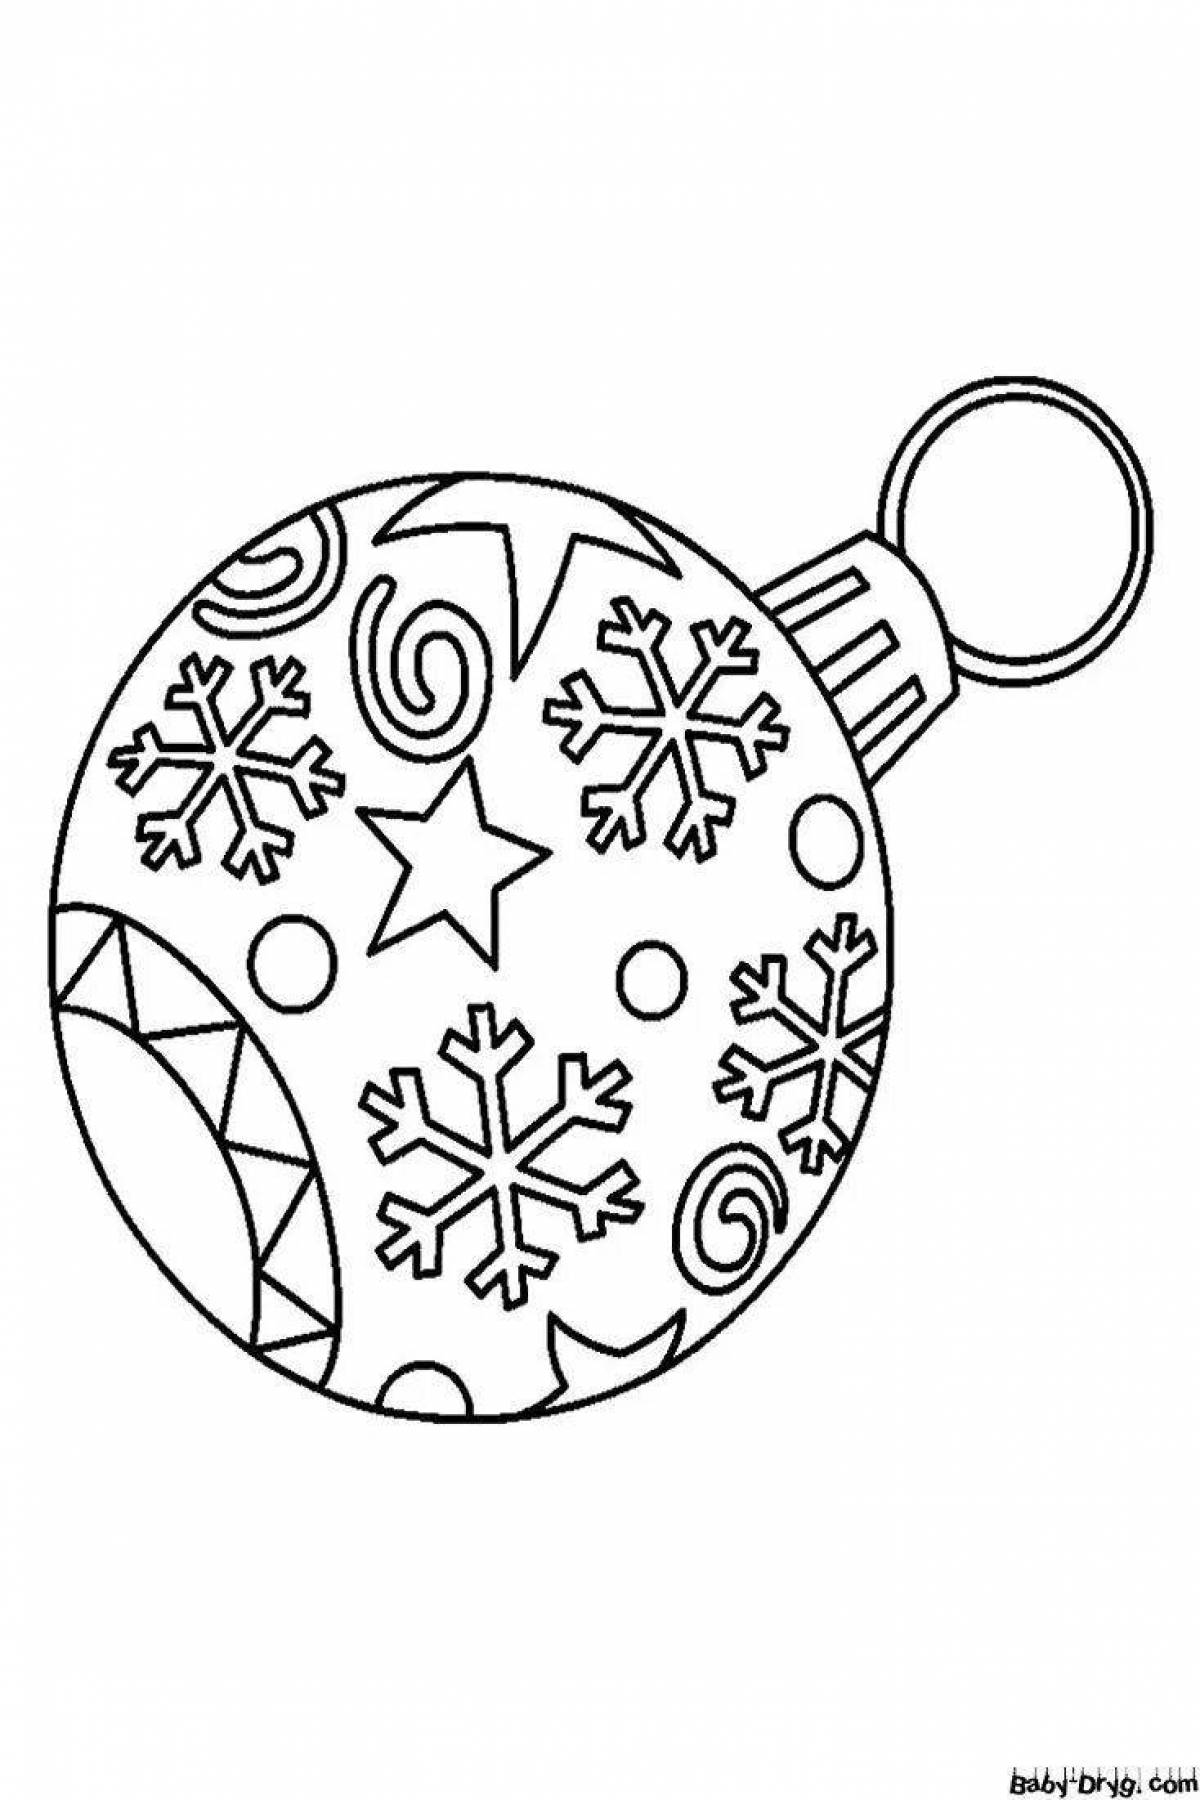 Bright Christmas ball coloring for kids